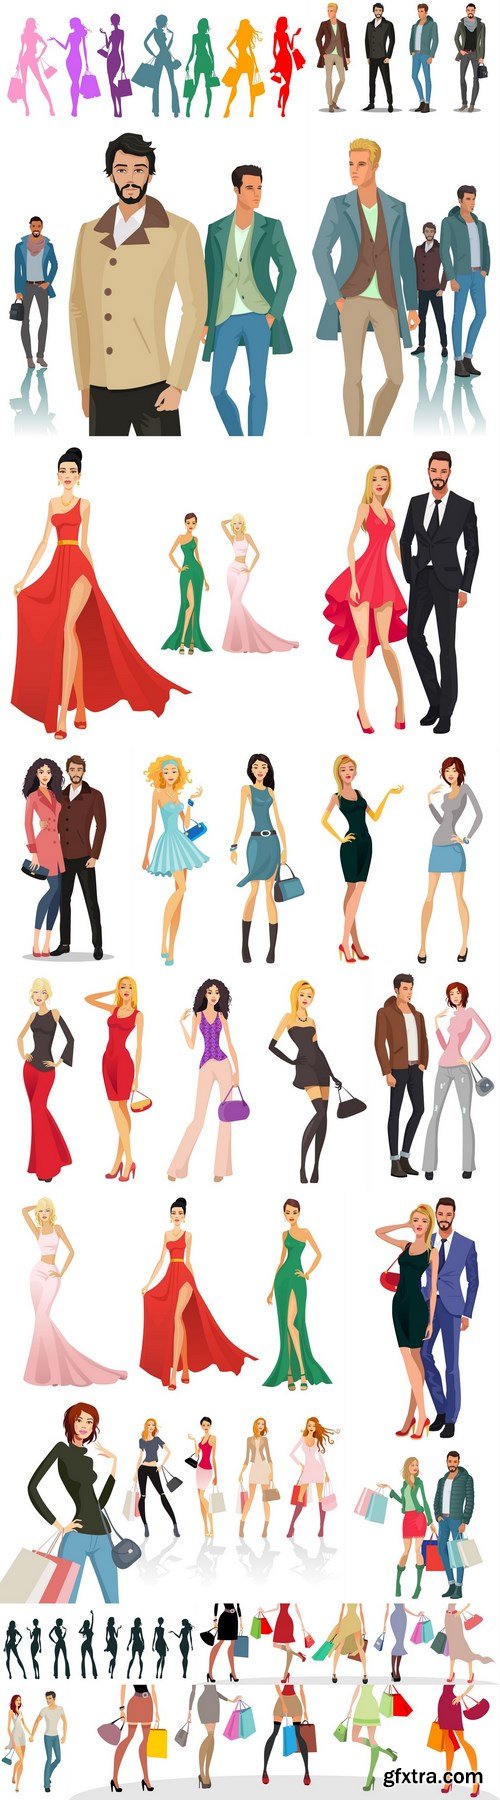 Female and male - Fashion & shopping - 18xEPS Vector Stock